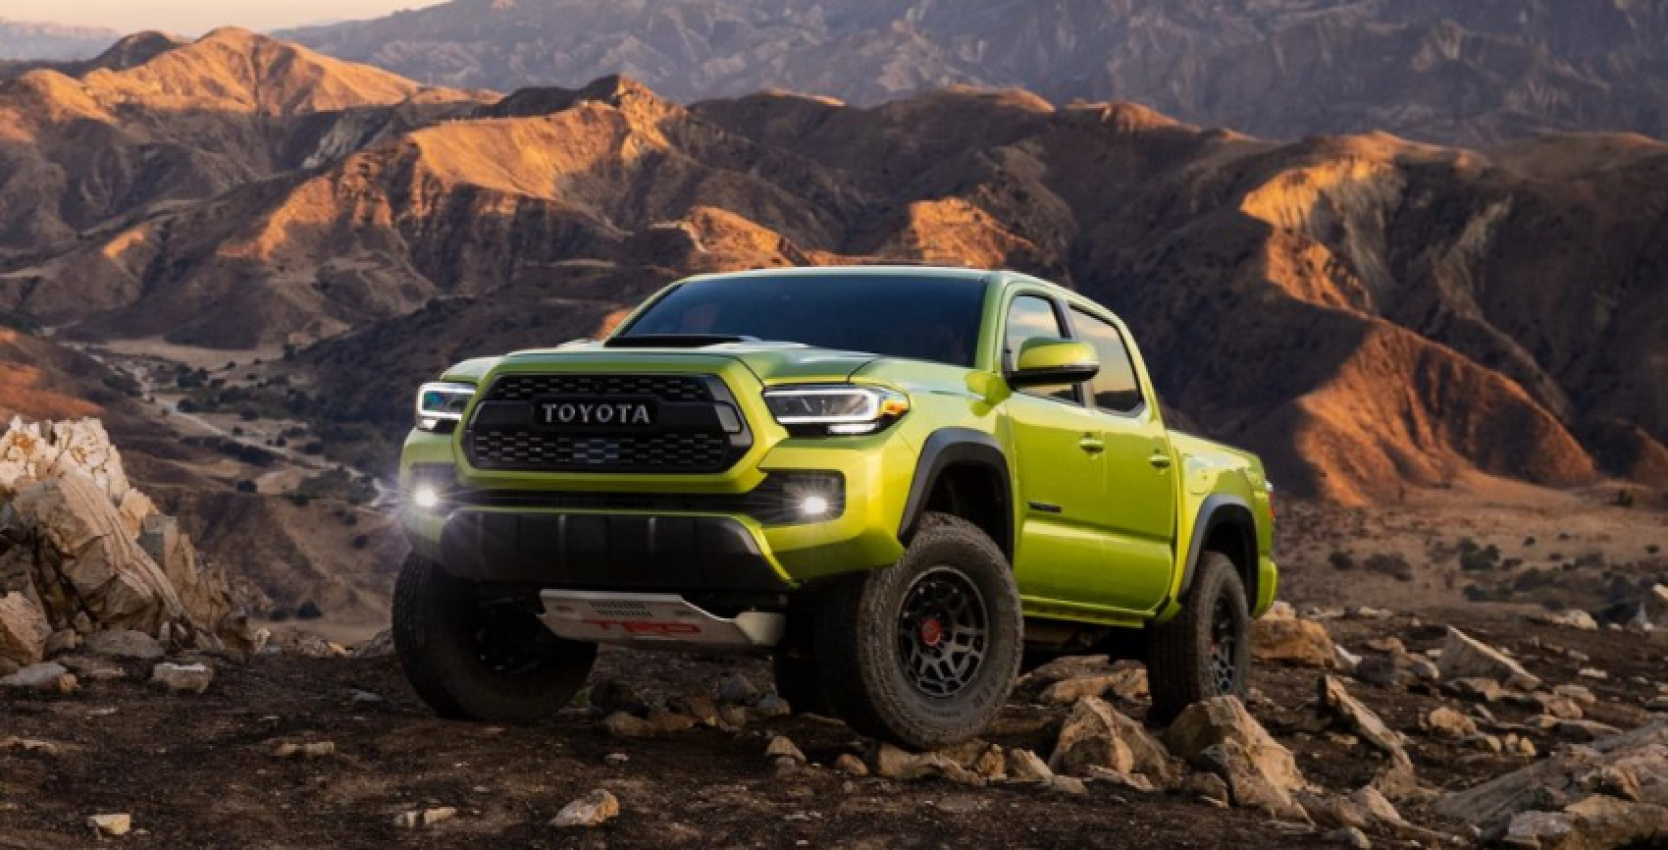 android, autos, cars, ford, toyota, ford ranger, ford ranger raptor, ranger, raptor, tacoma, toyota tacoma, android, ford ranger raptor vs. toyota tacoma trd pro: off-roading truck battle